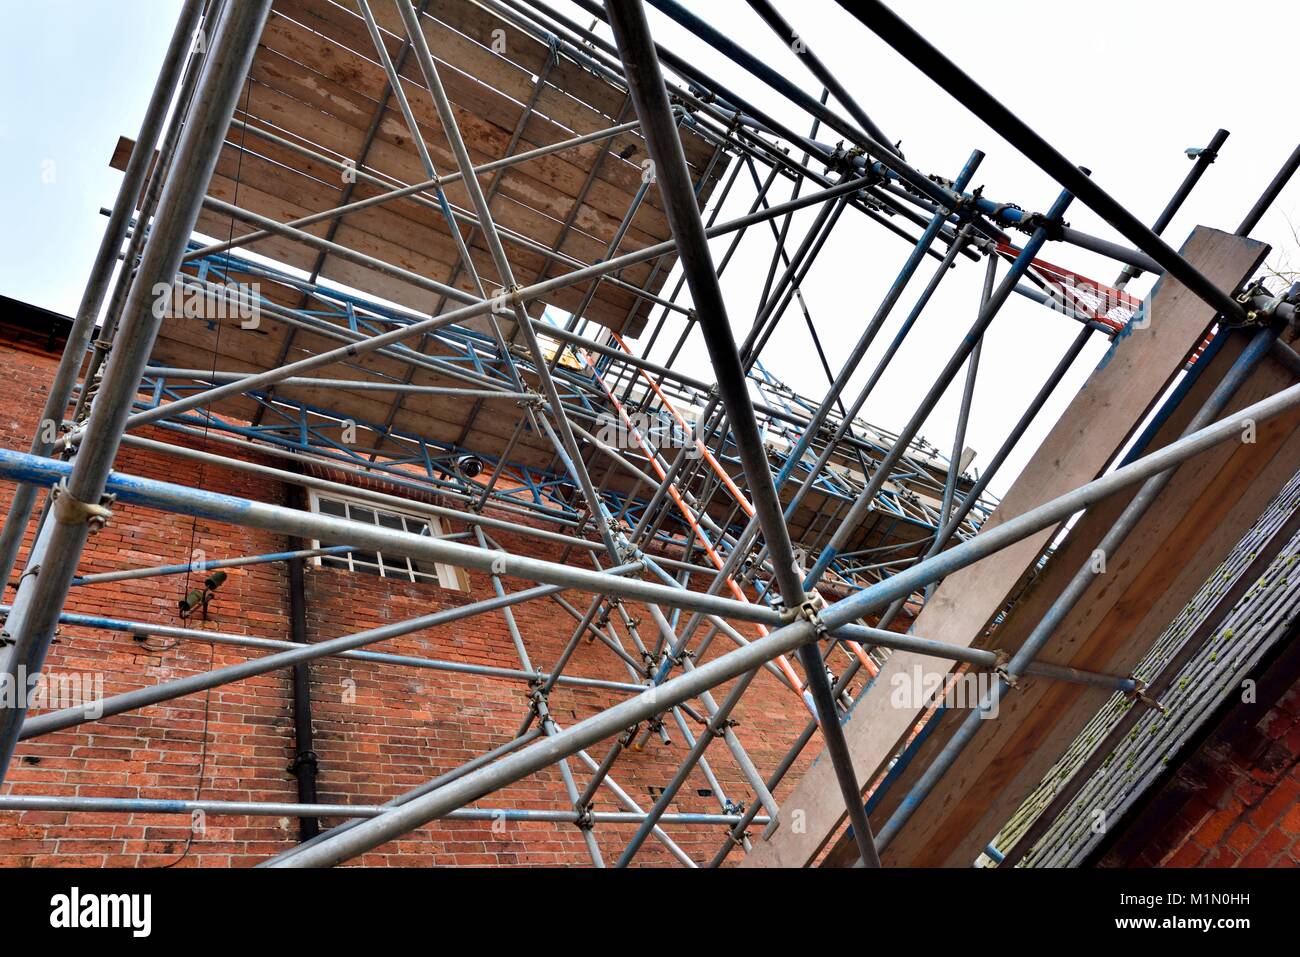 Scaffolding being used to renovate an old building Stock Photo